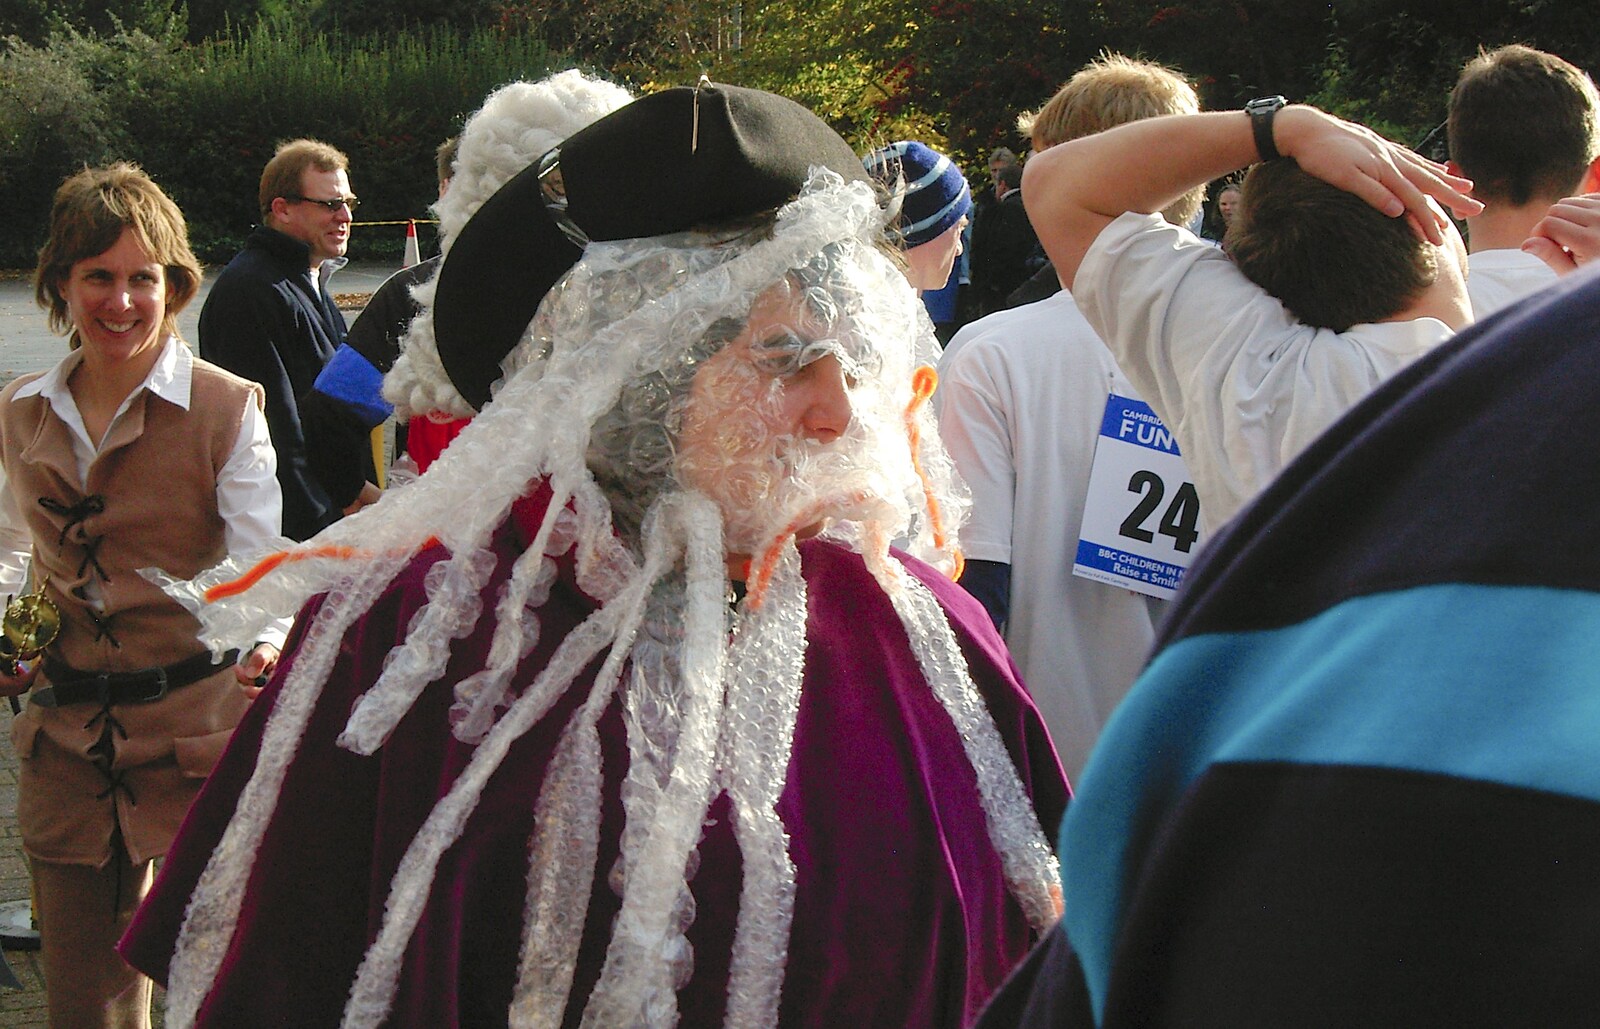 A Pirates of the Carribean character from Cambridge Science Park "Children in Need" Fun Run, Milton Road, Cambridge - 17th November 2006